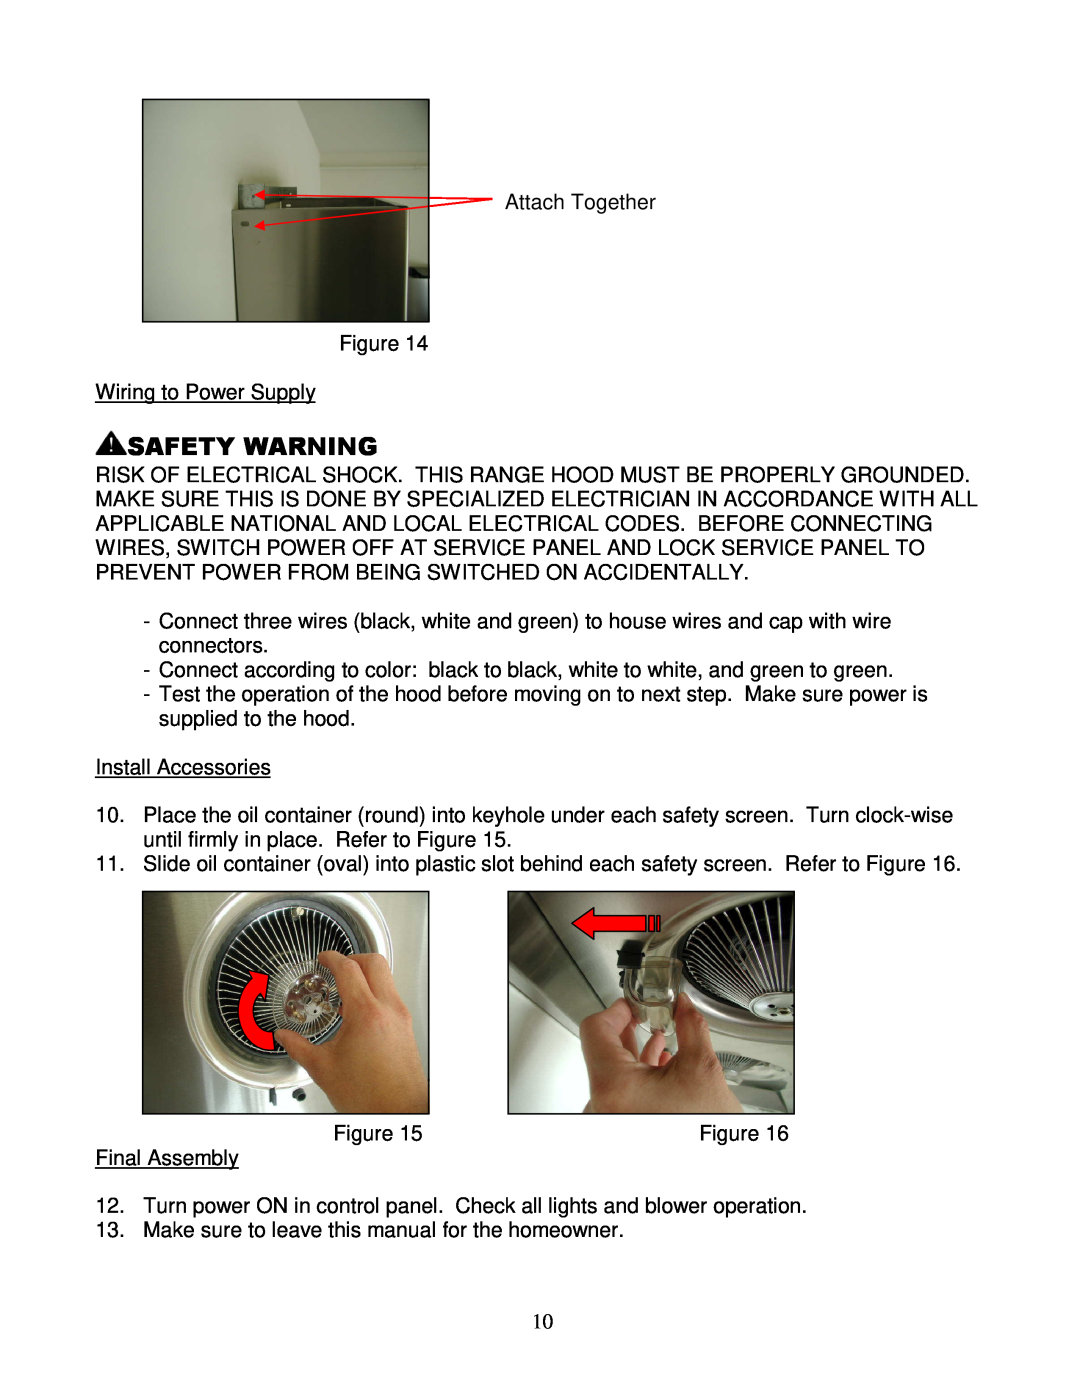 Kobe Range Hoods RA3836SQ installation instructions Safety Warning, Attach Together Figure Wiring to Power Supply 